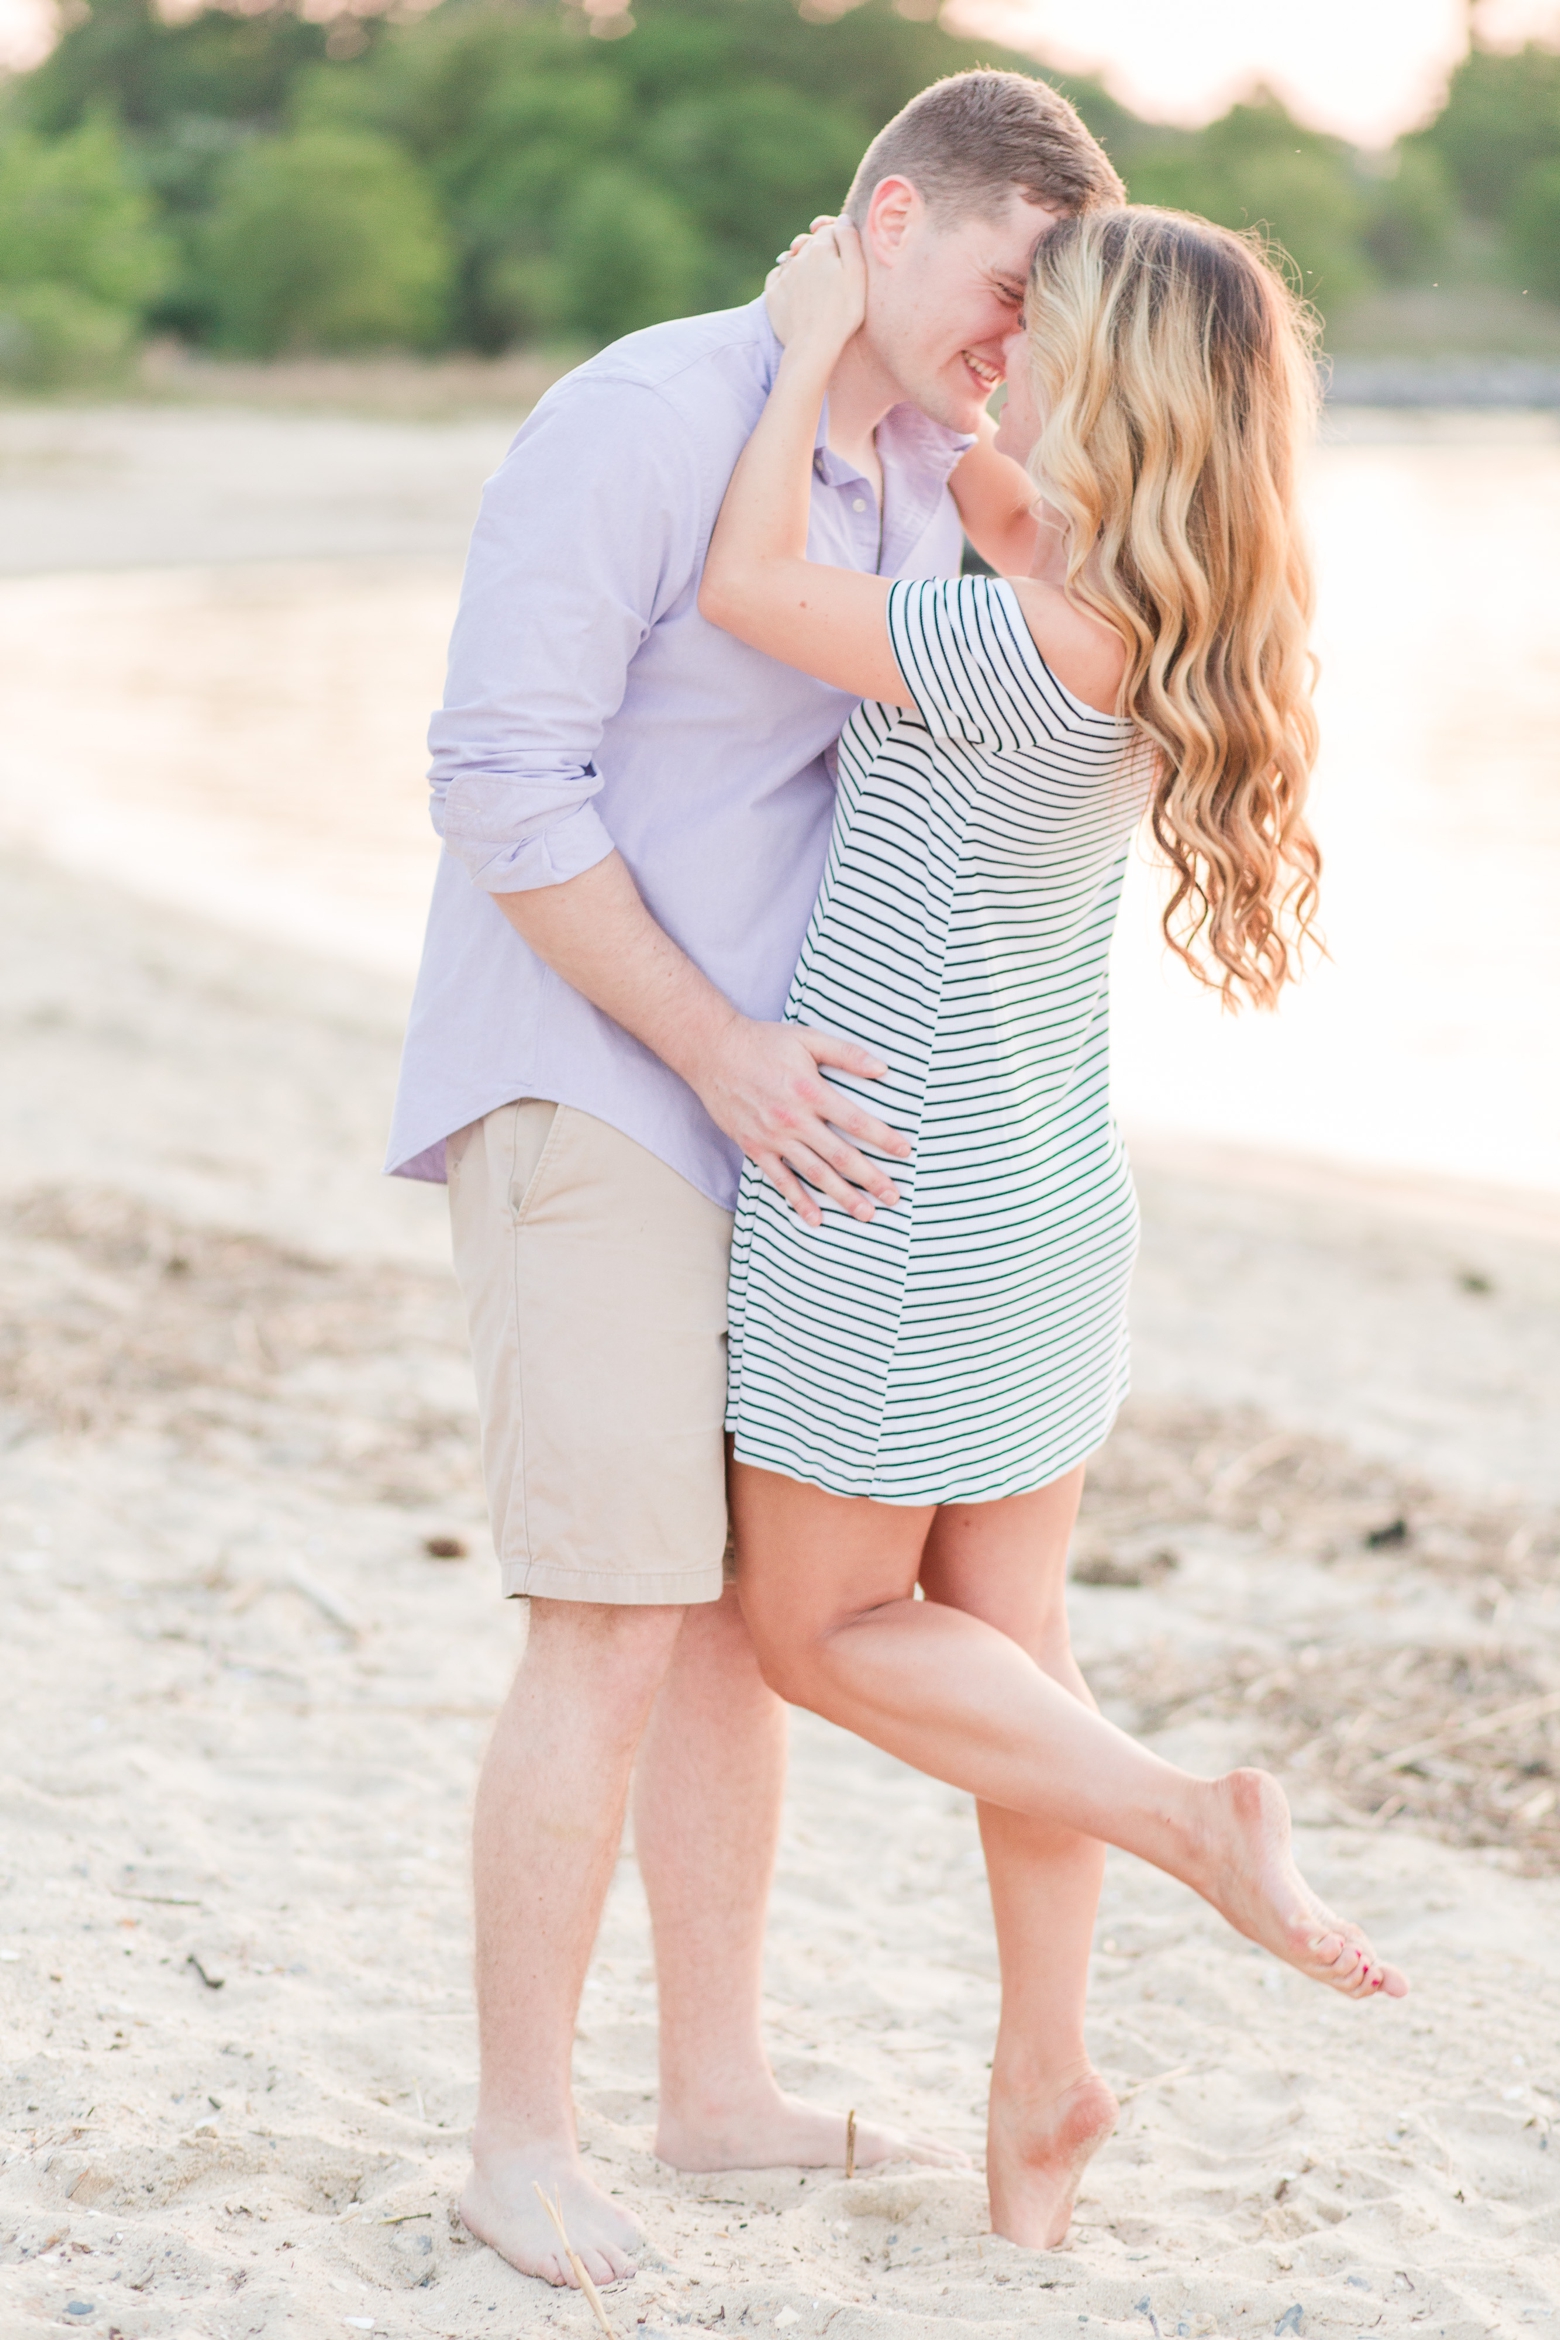 Yorktown Engagement Photography by Angie McPherson Photography